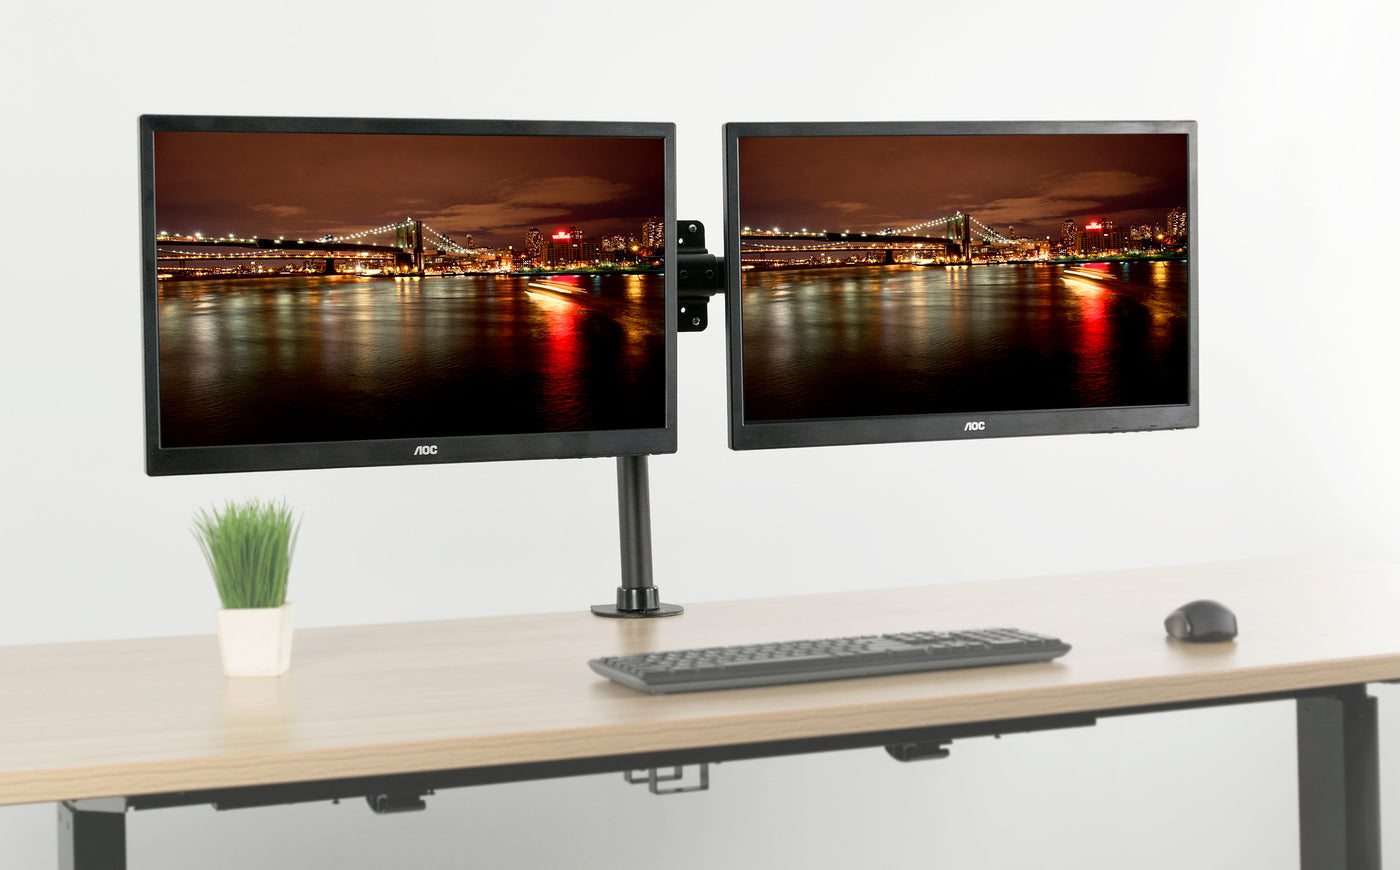 Dual adapter bracket for a dual screen set up in a workspace.